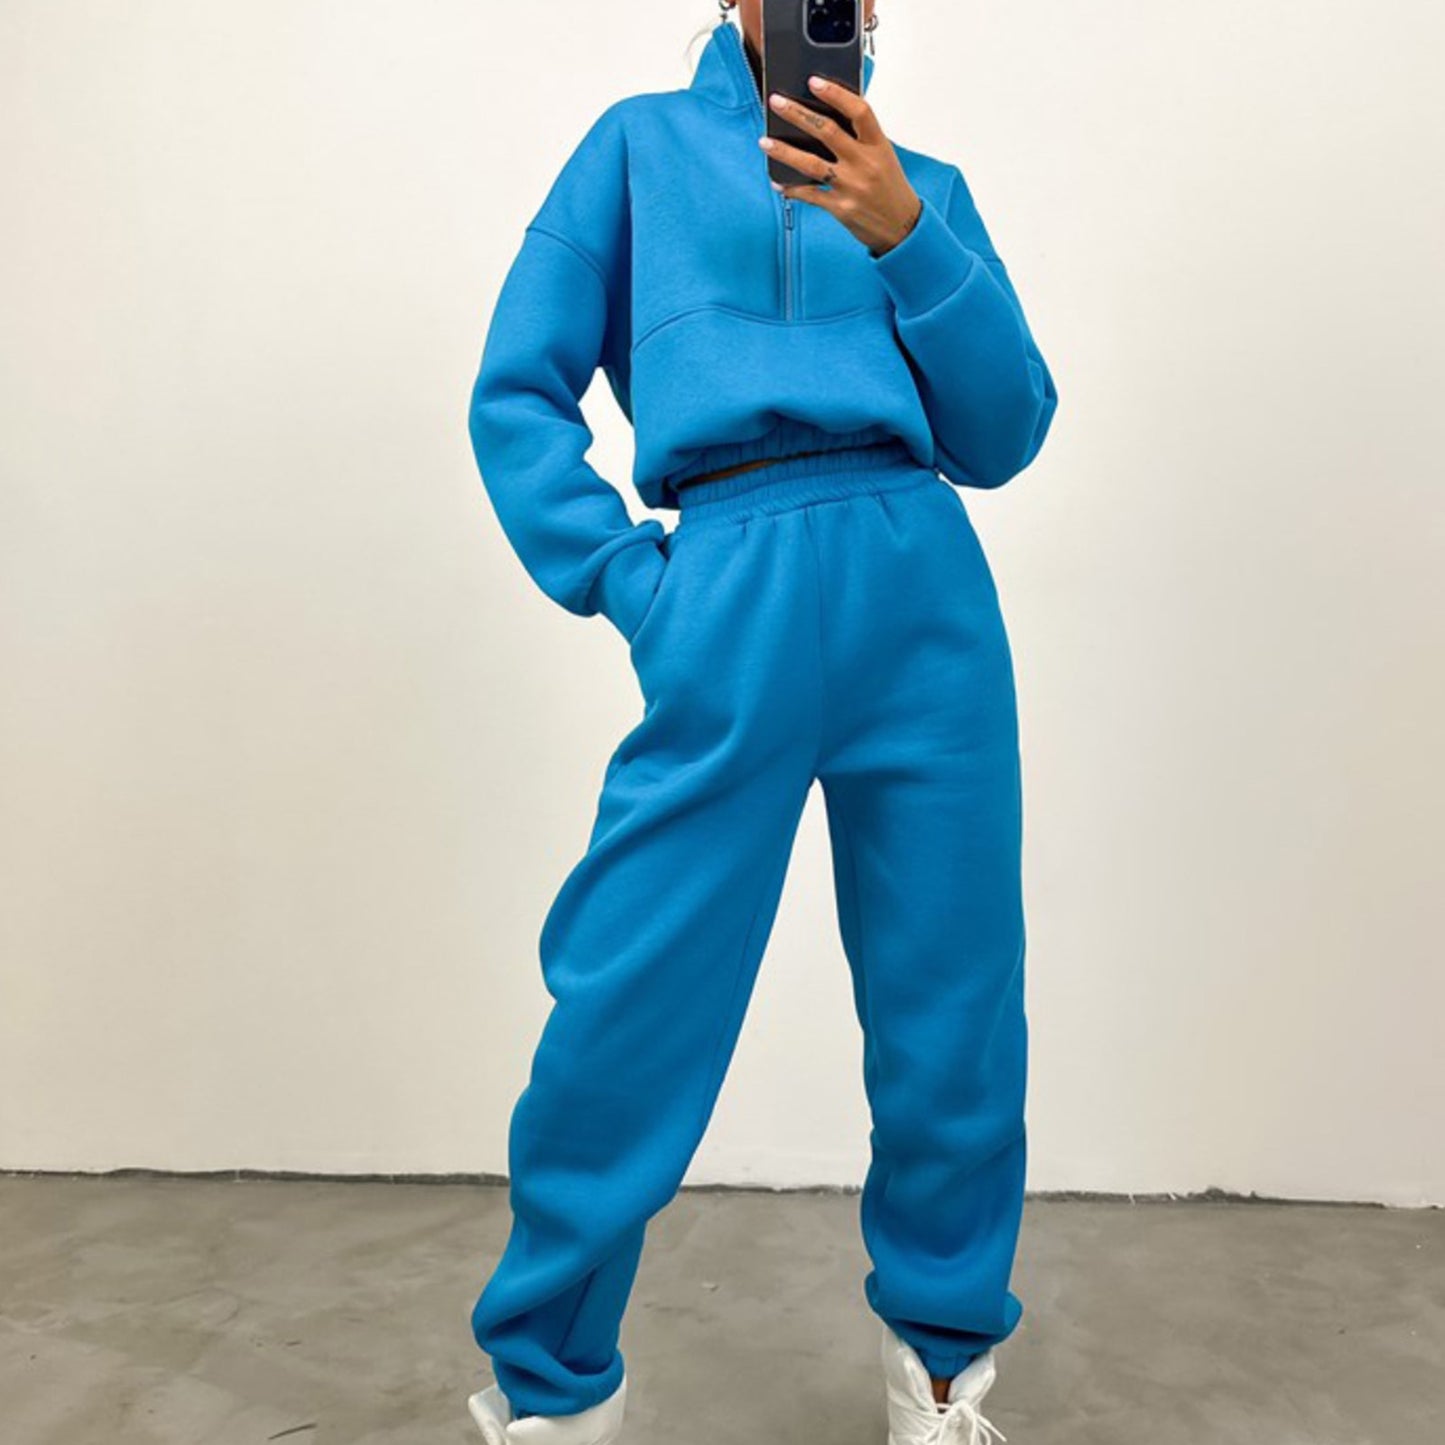 Women's Autumn/Winter 2 Piece Sweatshirt/Solid Color Pullover + Sports Casual Pants